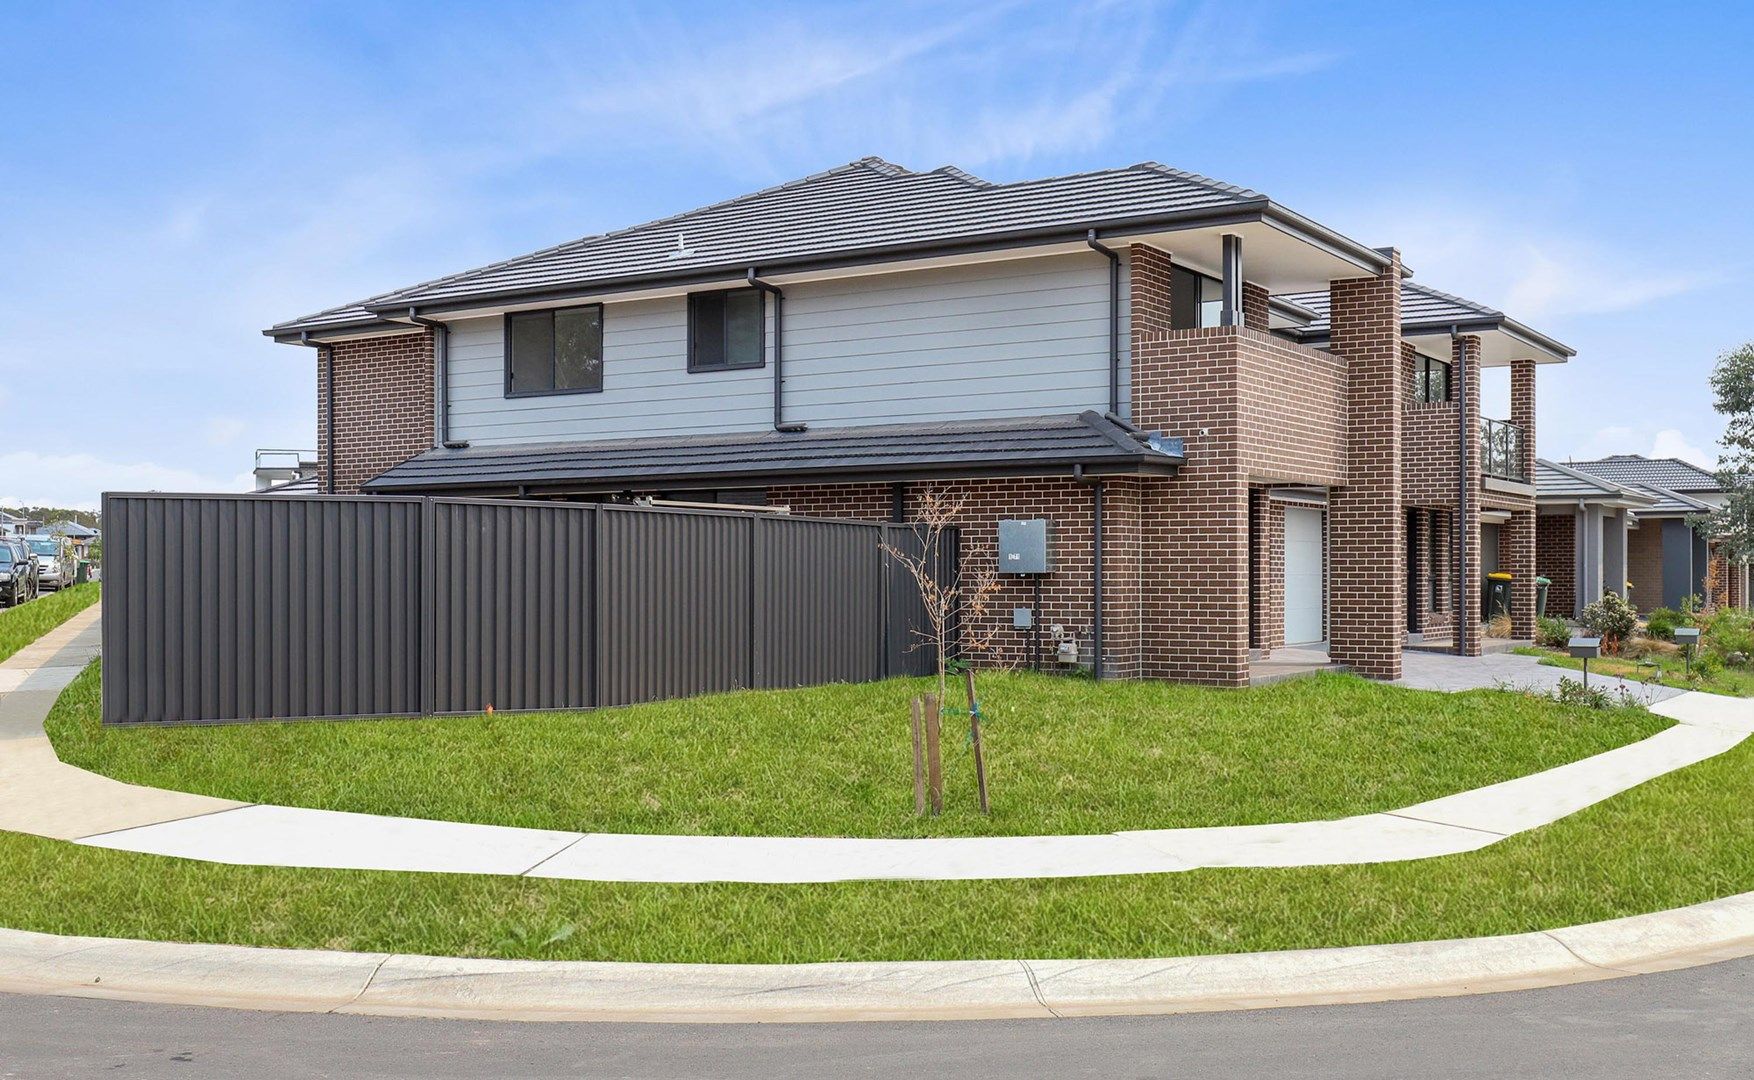 5 bedrooms Semi-Detached in 71A Aqueduct Street LEPPINGTON NSW, 2179